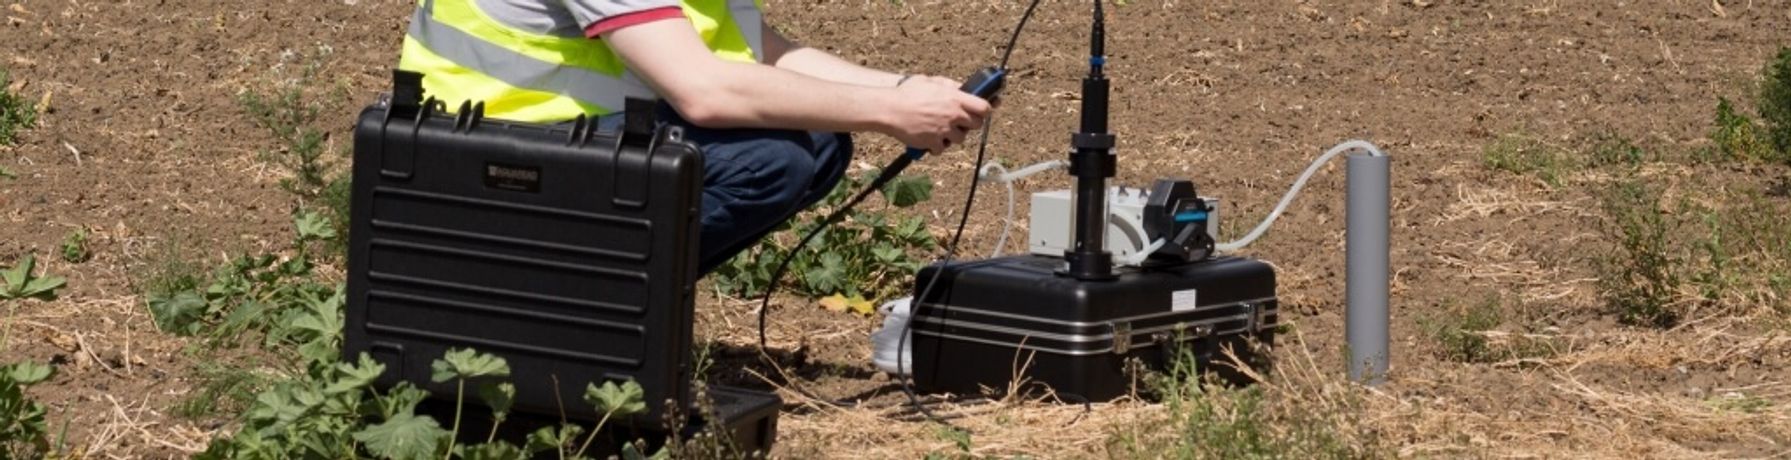 Water monitoring instruments for groundwater monitoring - Soil and Groundwater - Soil and Groundwater Monitoring and Testing